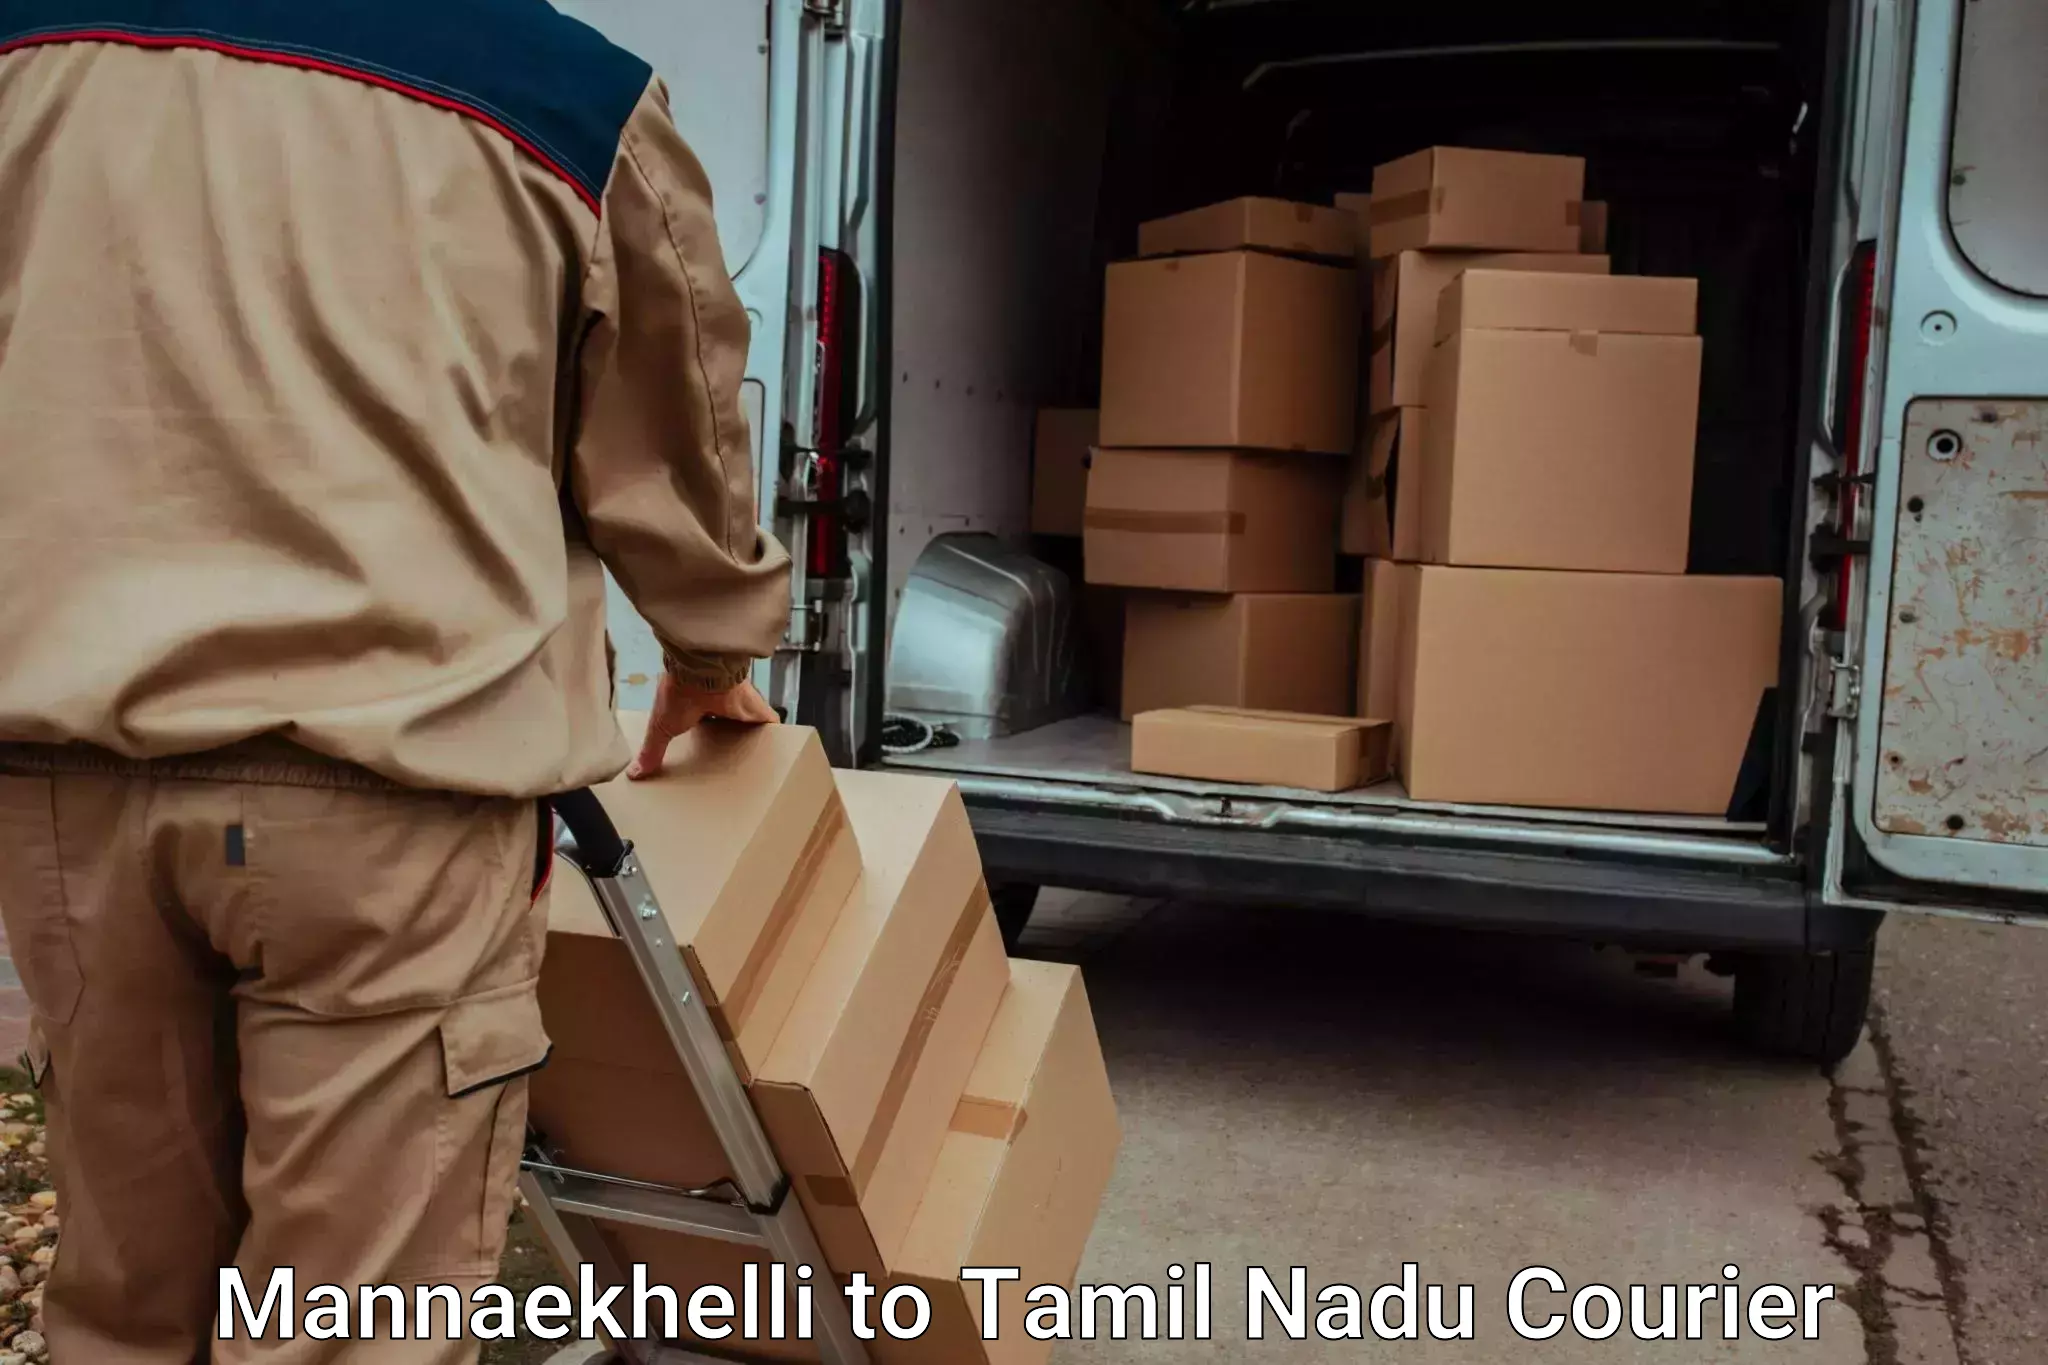 Professional baggage transport Mannaekhelli to Meenakshi Academy of Higher Education and Research Chennai